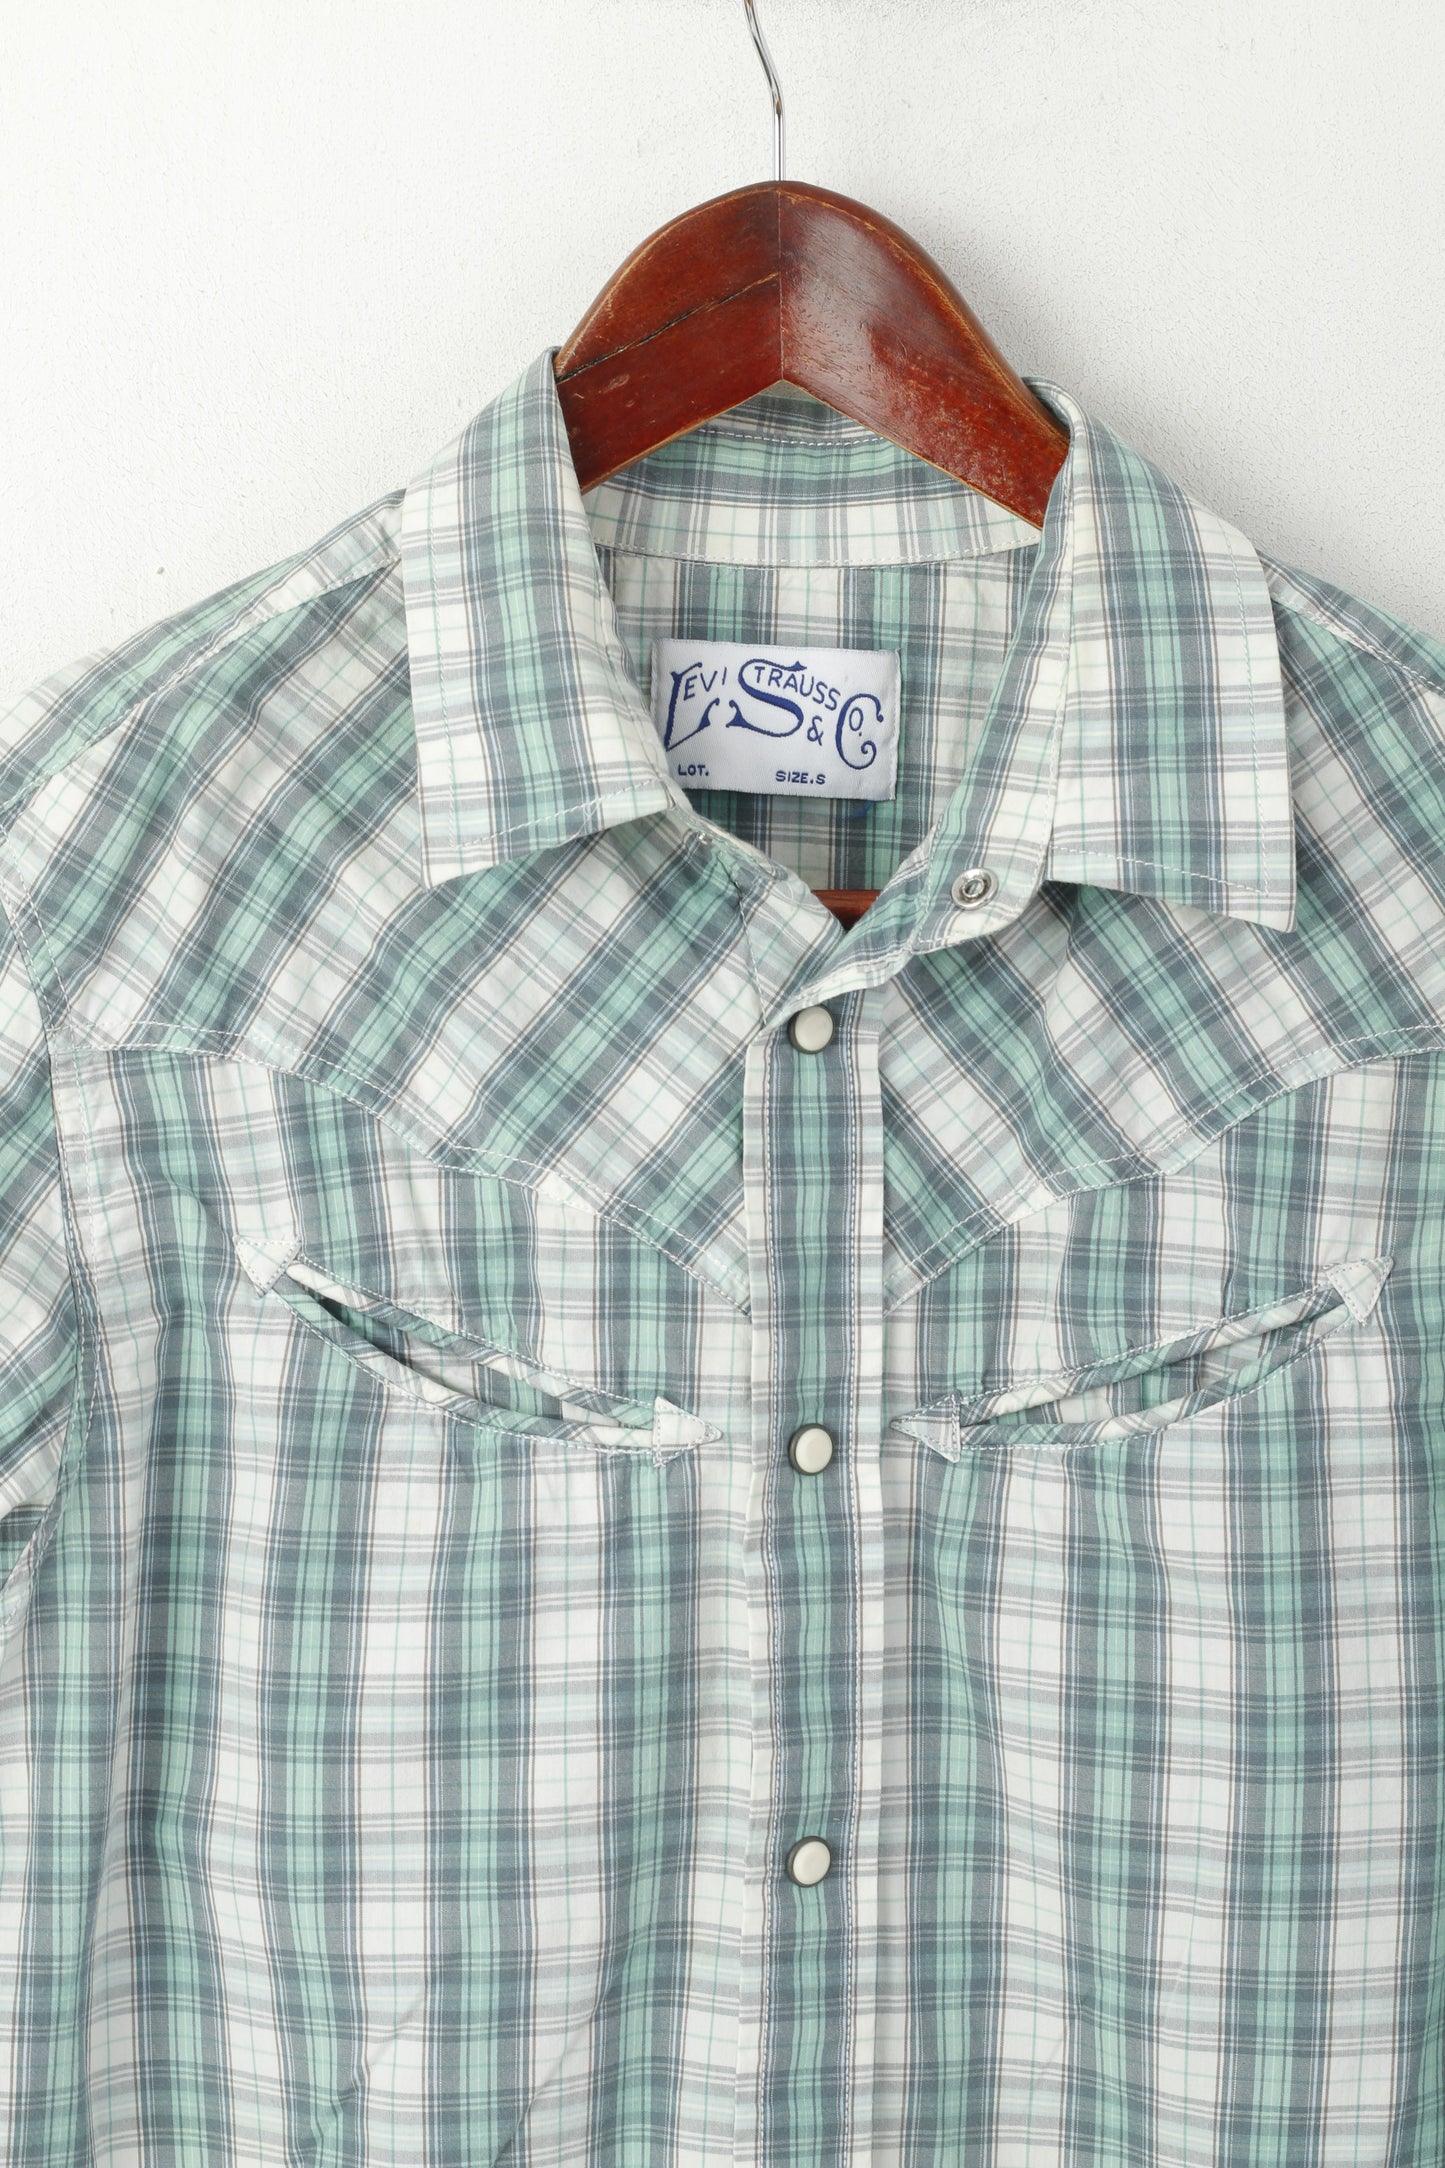 Levi's Men S Casual Shirt Green Cotton  Checkered Long Sleeve Snap Slim Fit Top